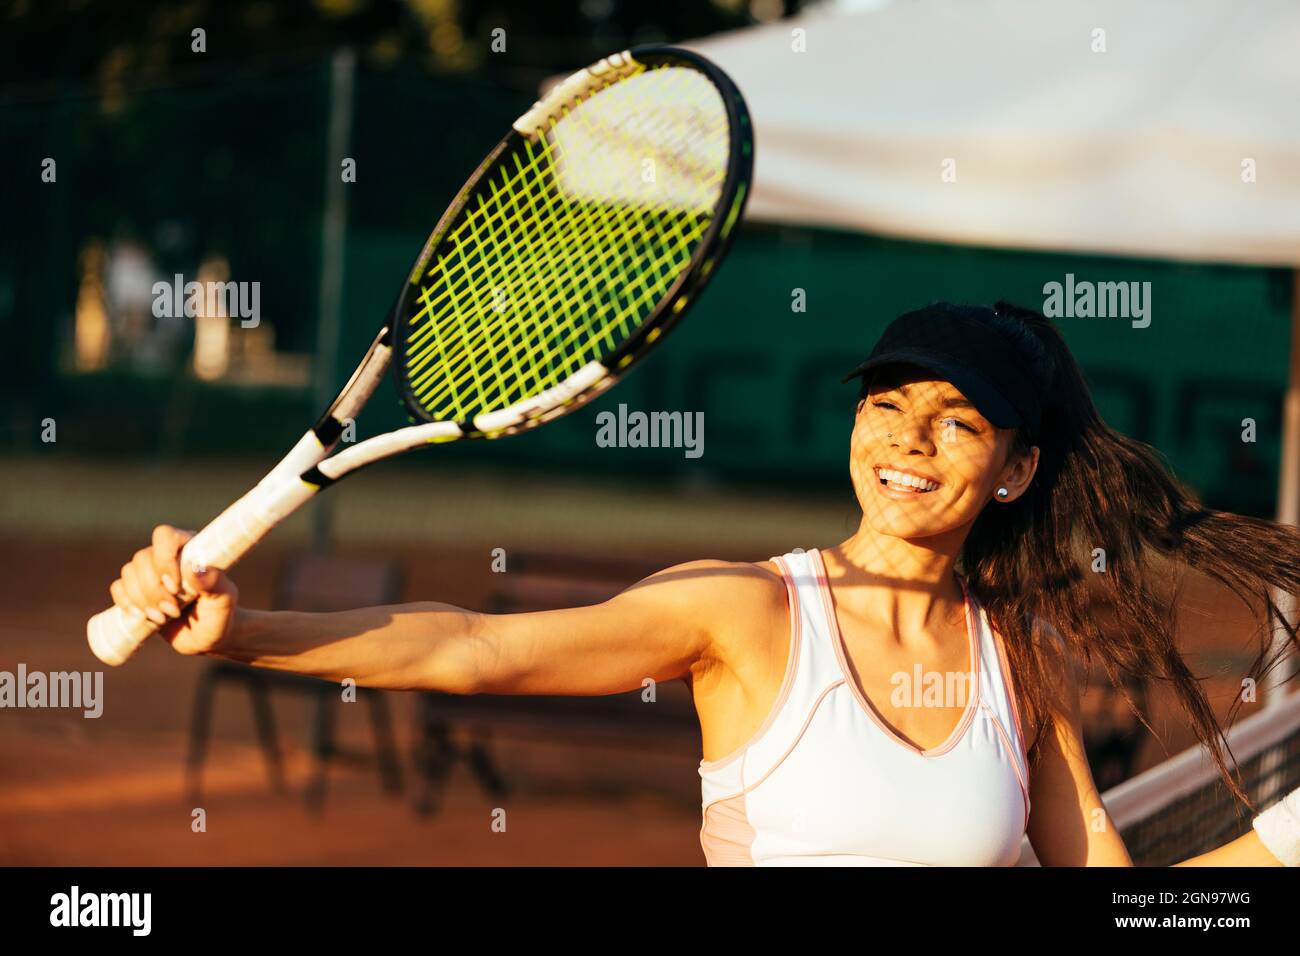 Happy female athlete with racket playing tennis at sports court Stock Photo